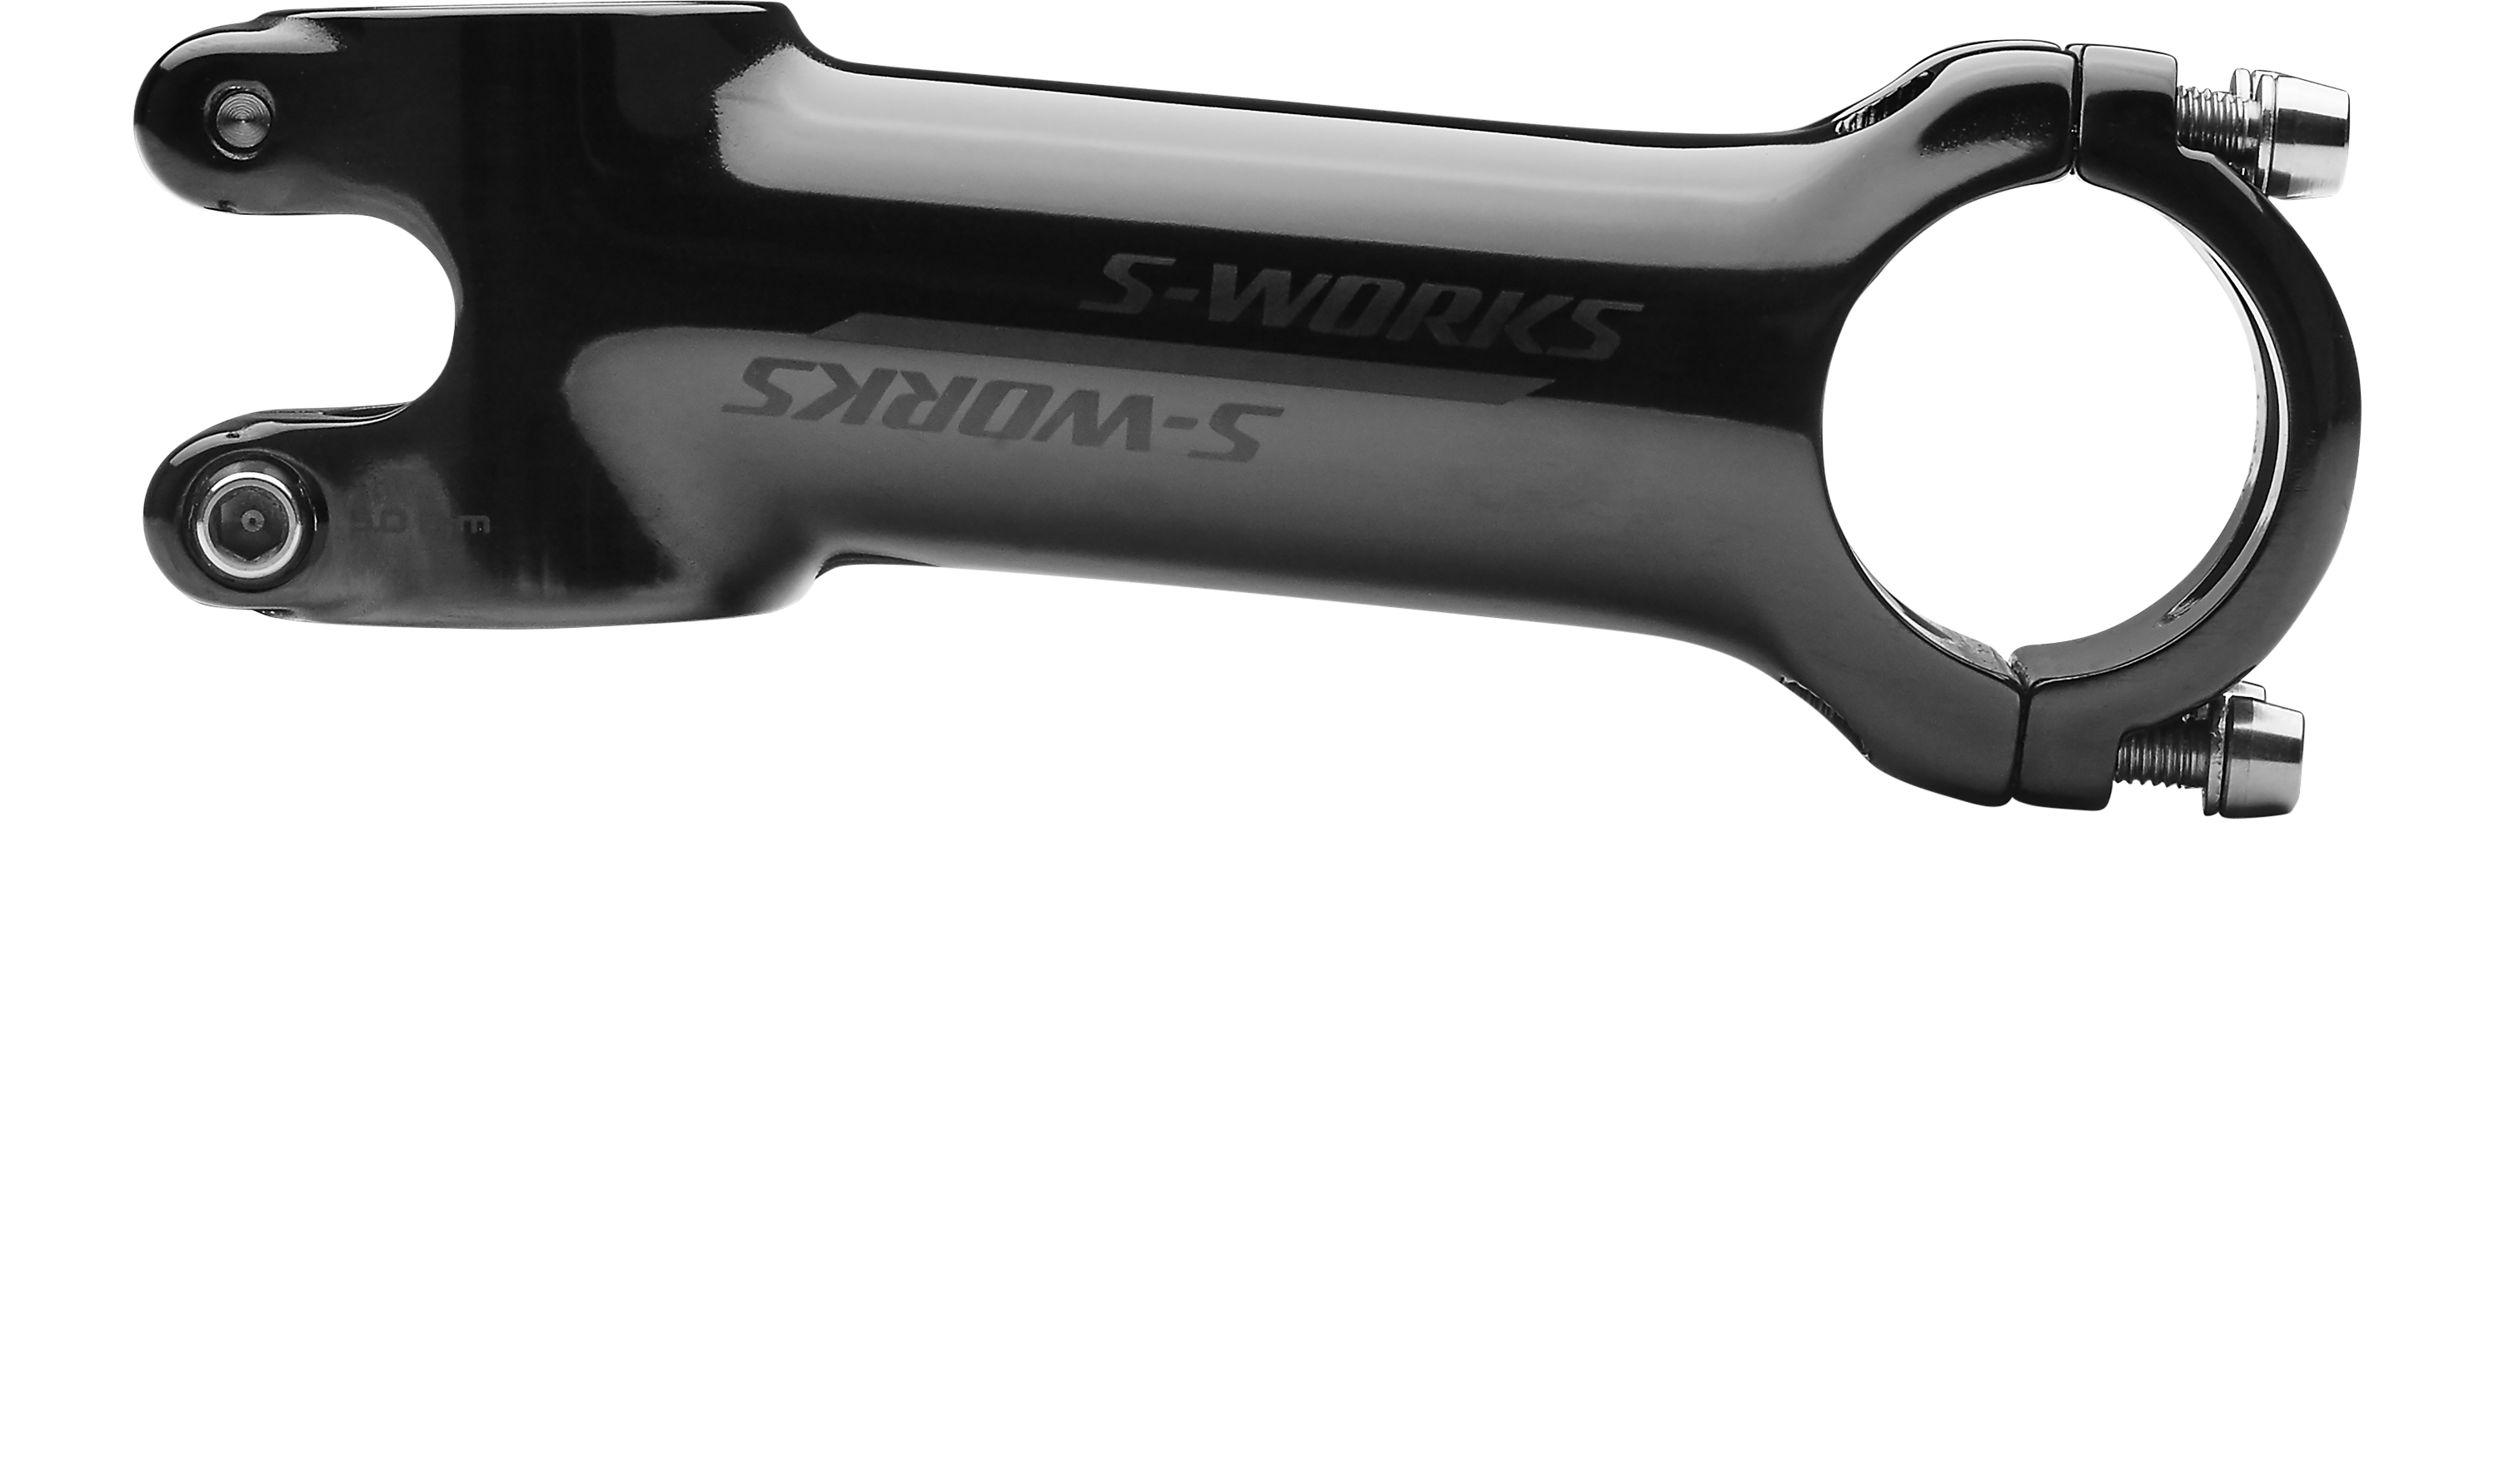 Specialized S-works SLステム 110mm 17°-